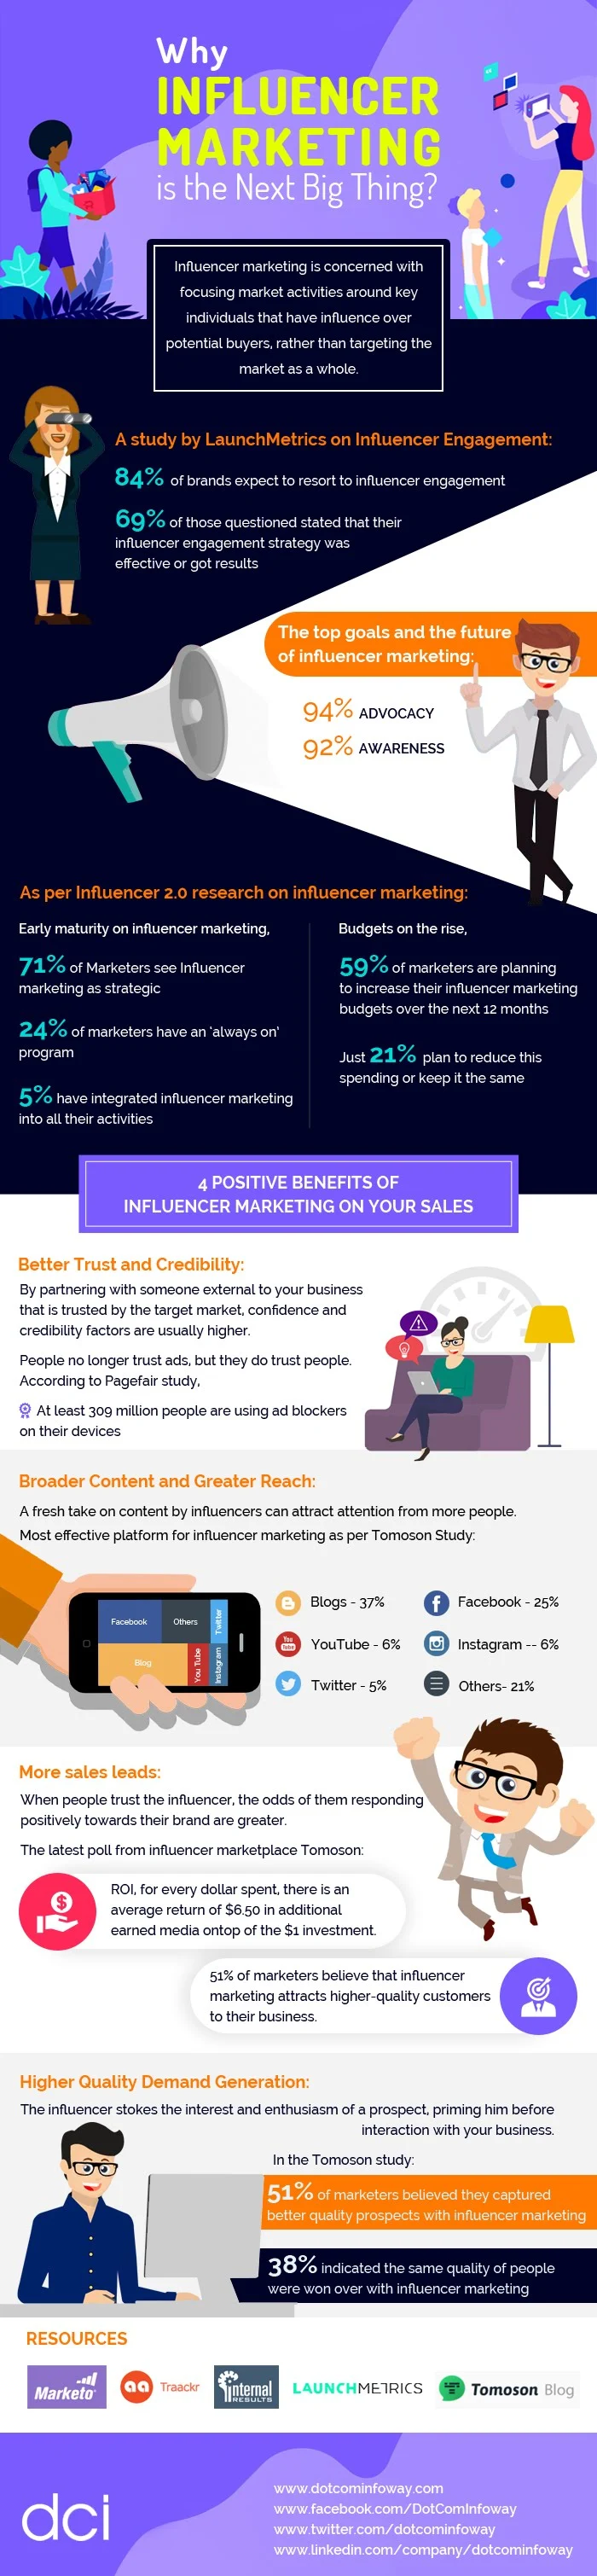 Why Influencer Marketing is the Next Big Thing? - #infographic